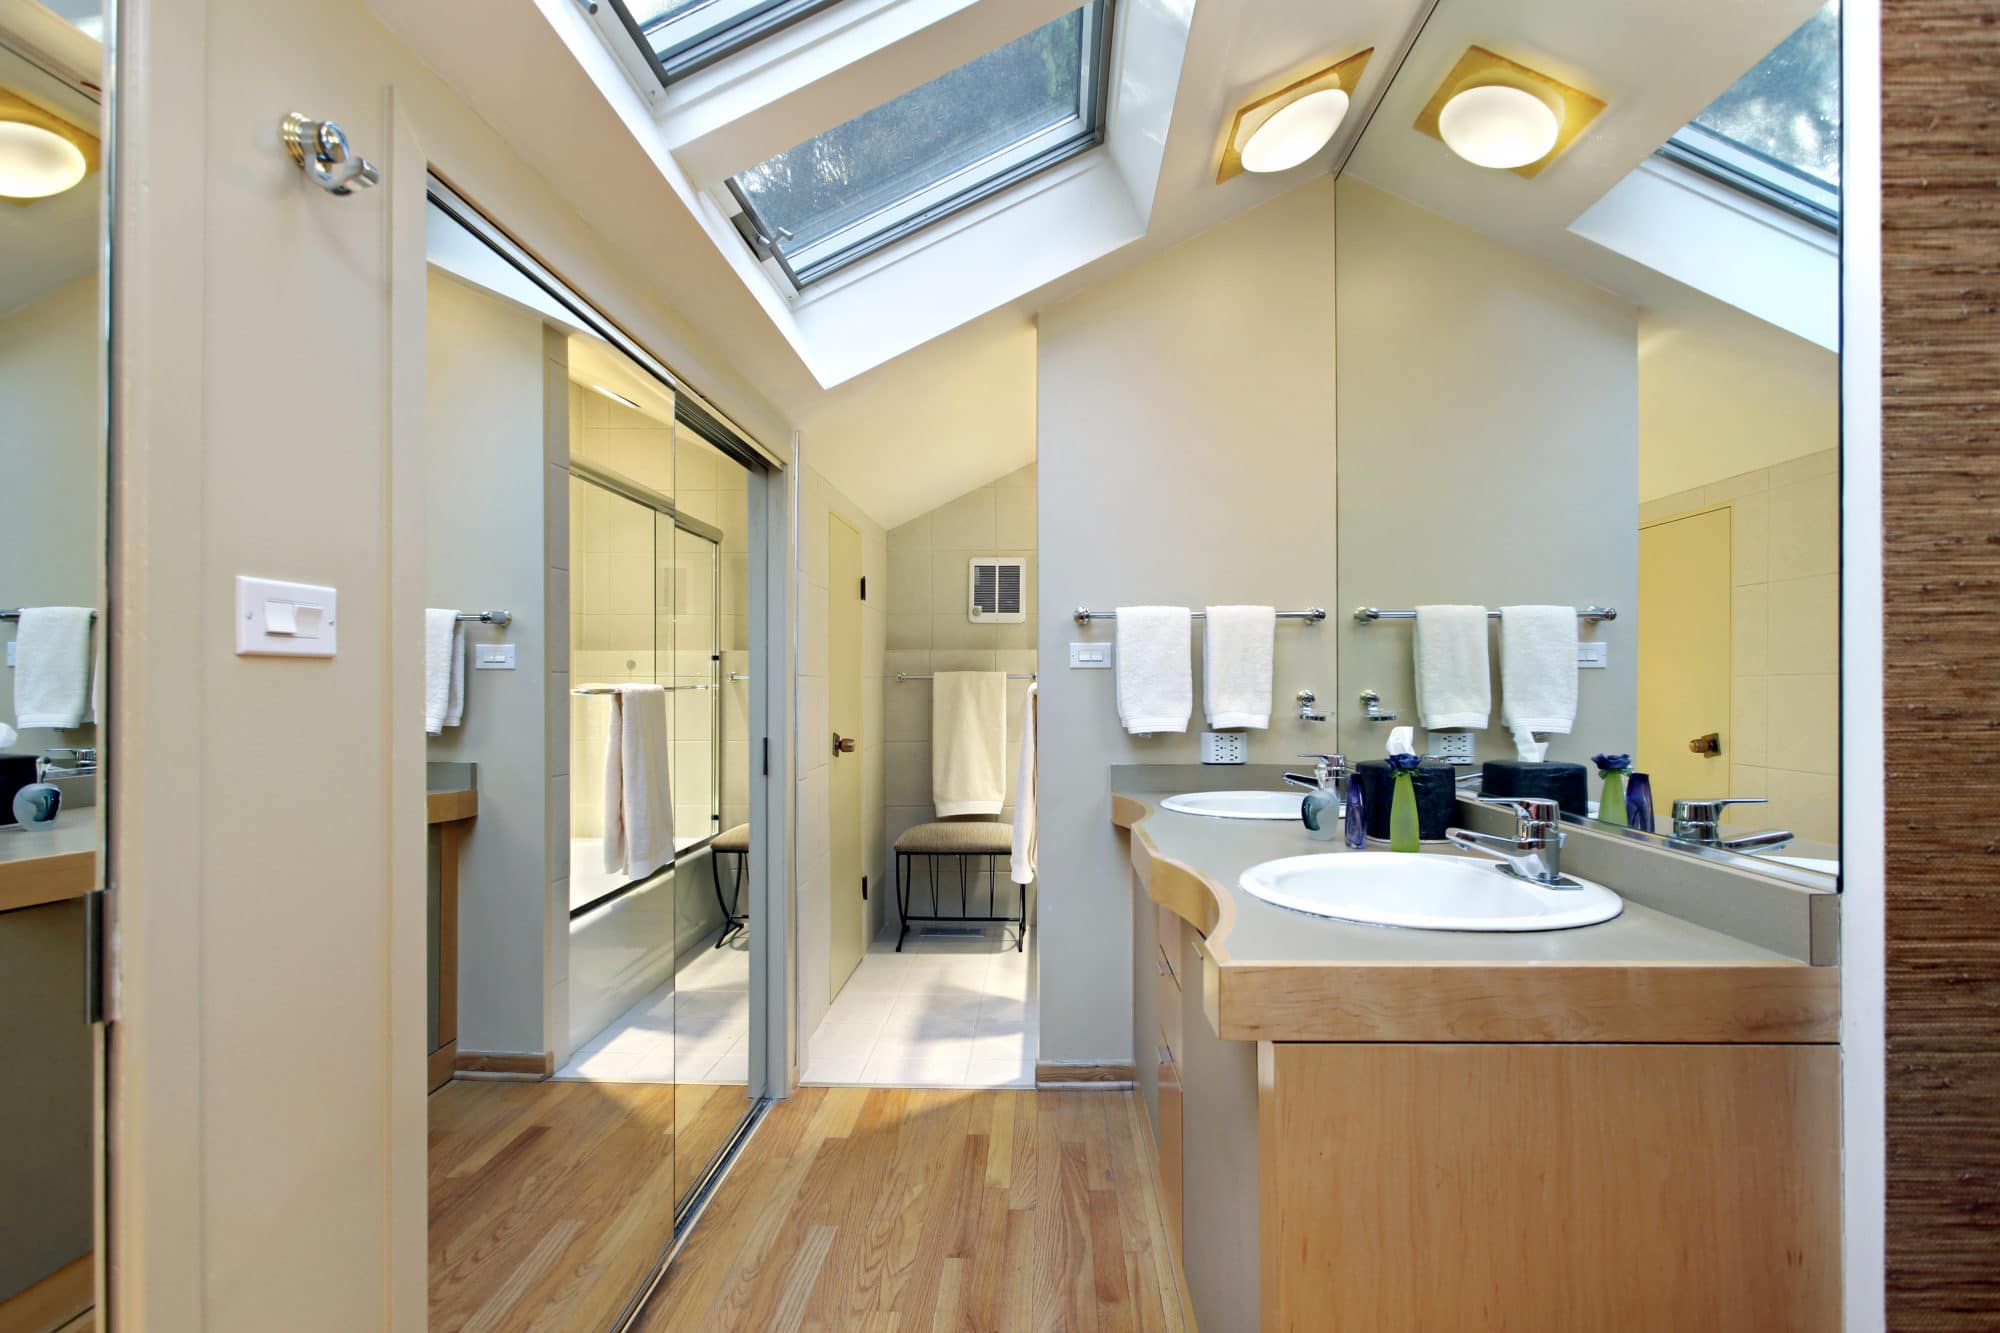 Sierra Remodeling with brighten your day with skylights in your bath!